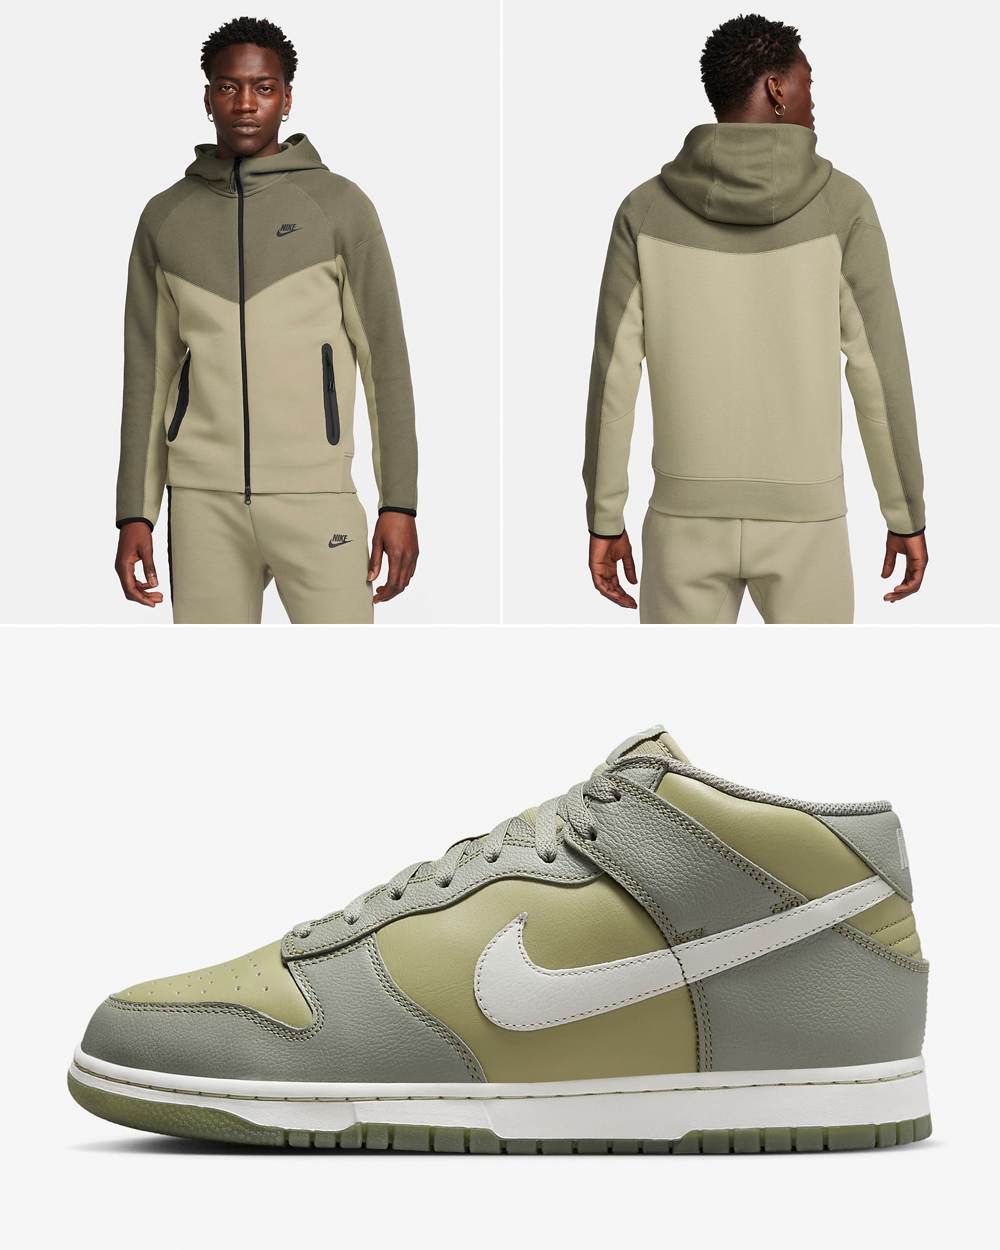 Nike-Dunk-Mid-Dark-Stucco-Neutral-Olive-Hoodie-Match-Outfit